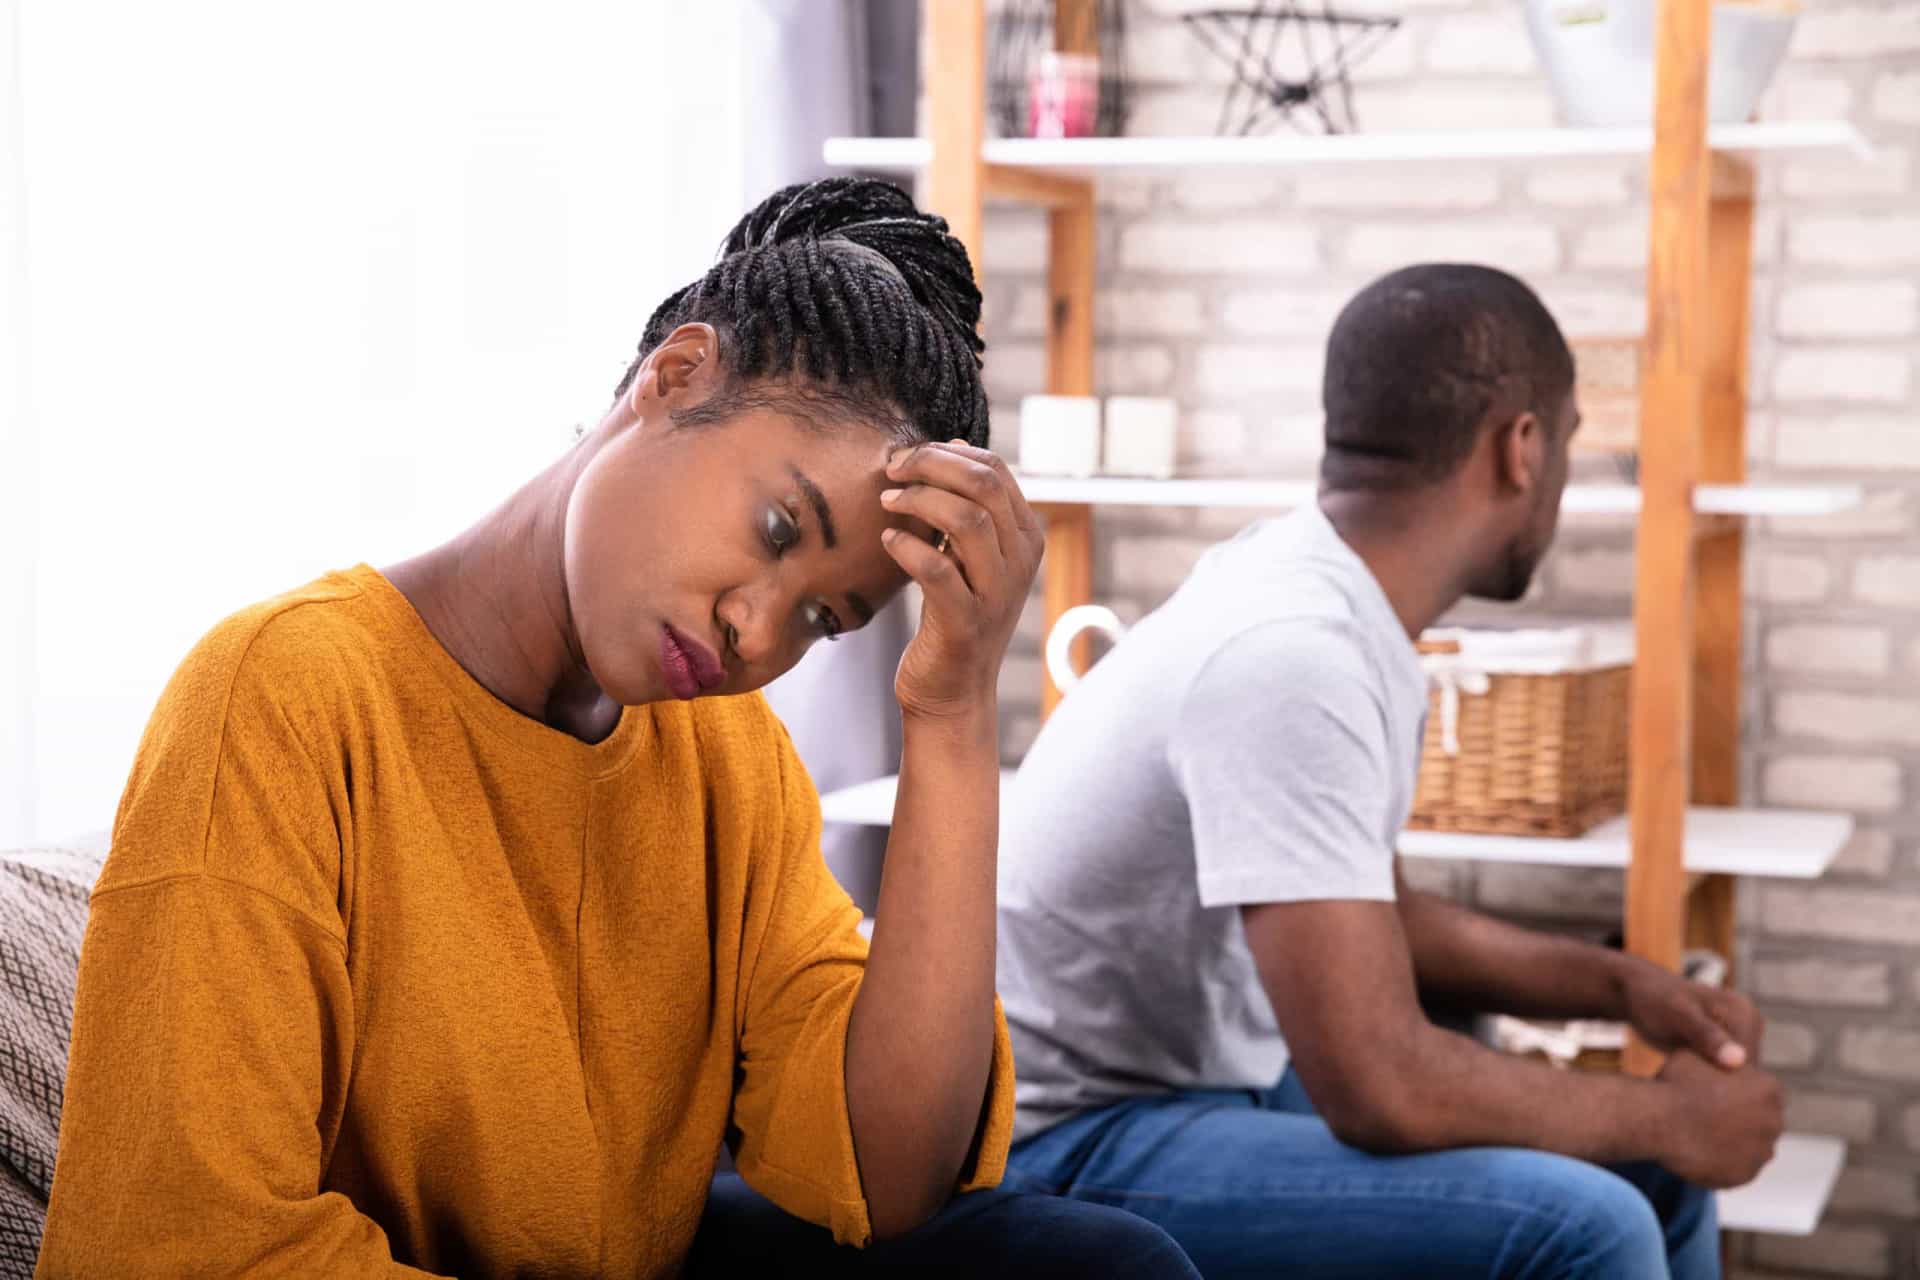 <p>If you feel like the relationship is moving too fast or too slowly, it can make you terribly upset over seemingly little things. You might even question the relationship. You need to address it in order to understand how to find the middle ground, and meet both of your needs. </p><p><a href="https://www.msn.com/en-us/community/channel/vid-7xx8mnucu55yw63we9va2gwr7uihbxwc68fxqp25x6tg4ftibpra?cvid=94631541bc0f4f89bfd59158d696ad7e">Follow us and access great exclusive content everyday</a></p>